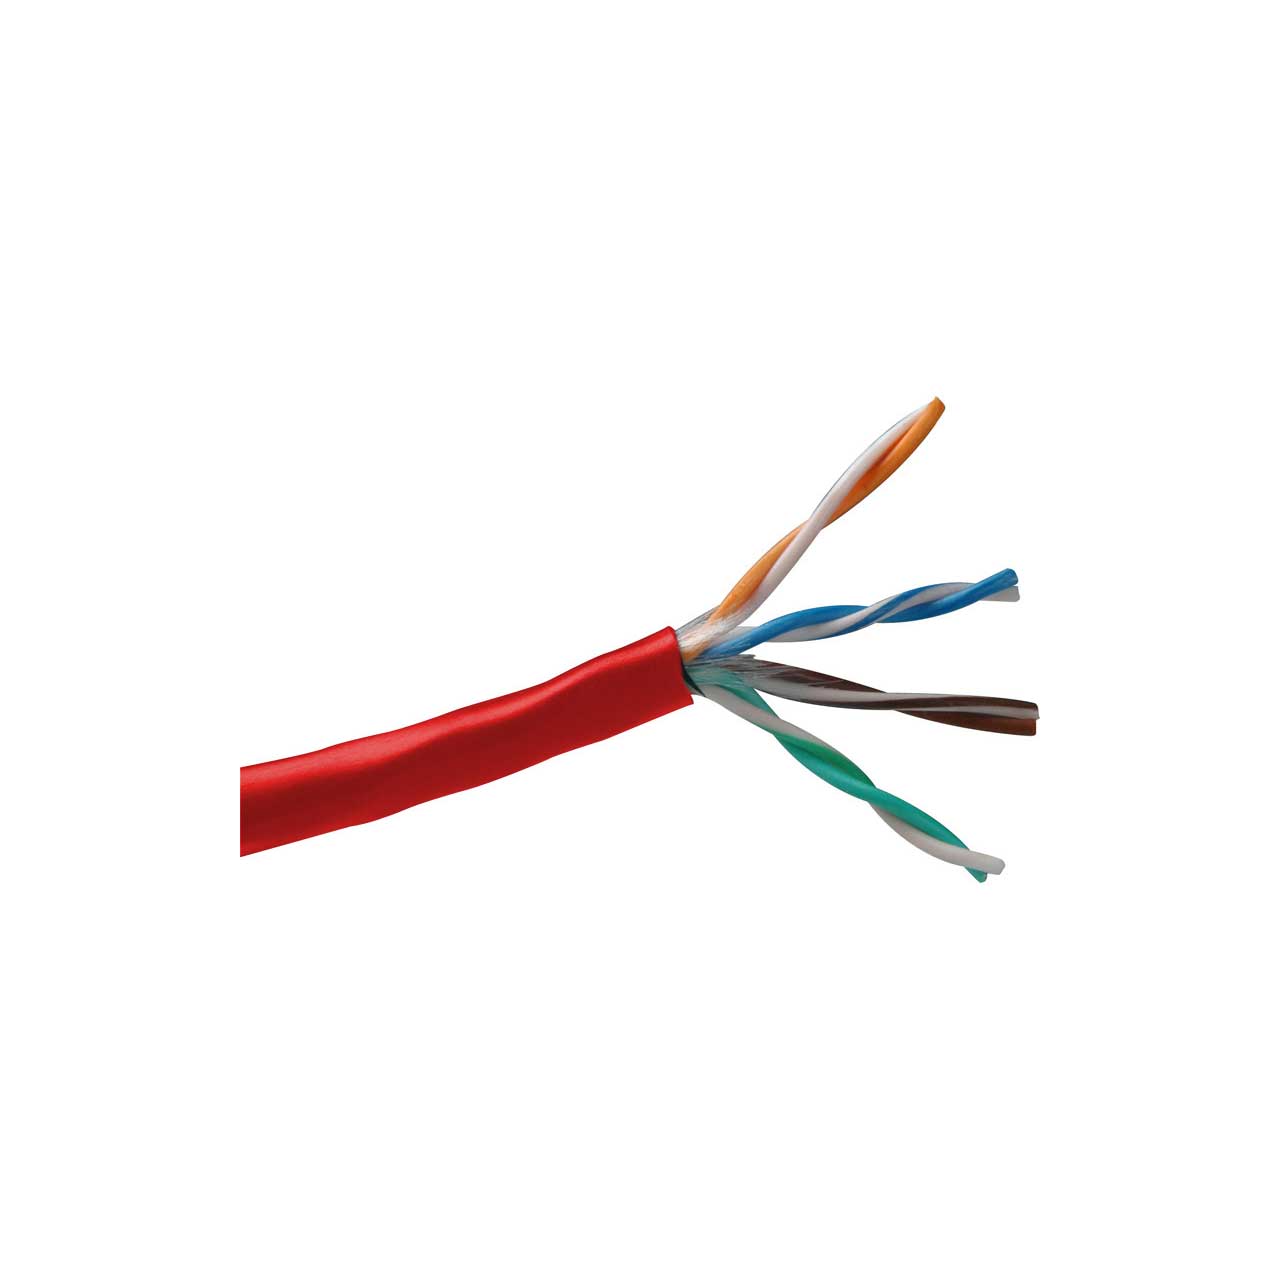 Belden 1583A 24 AWG CAT5e Non-Bonded Twisted Pair Cable - Red - 1000 Foot